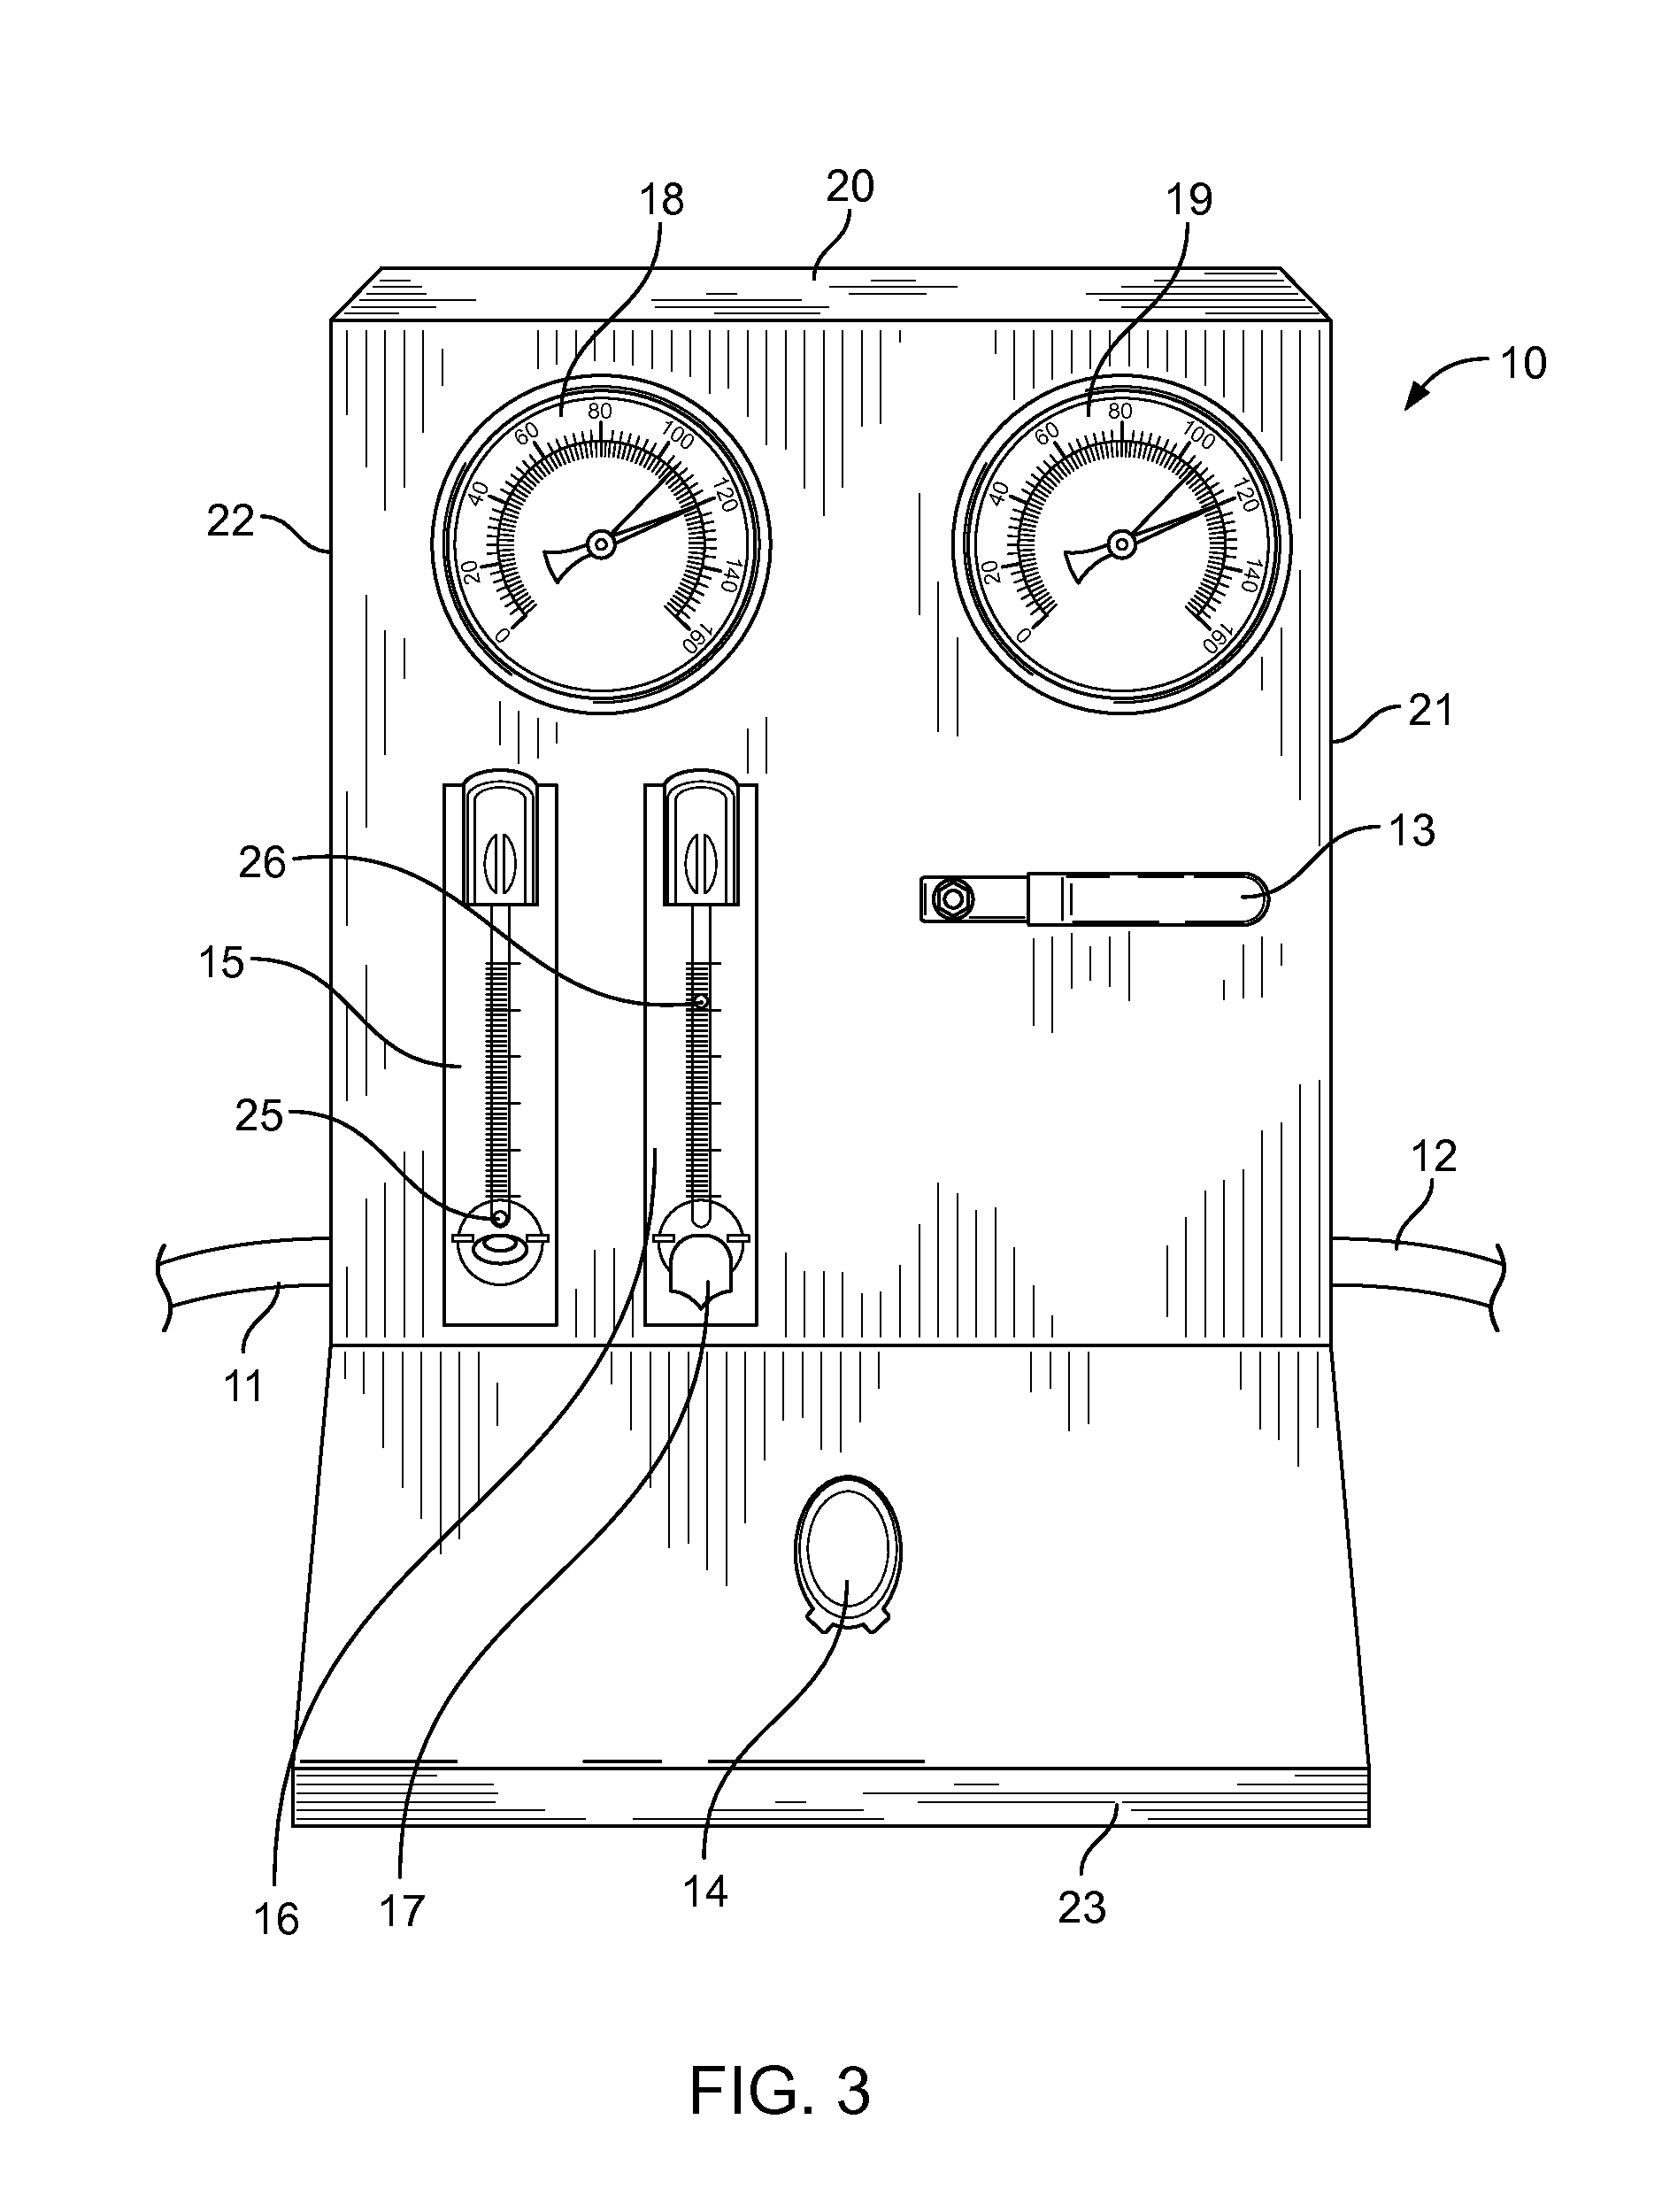 Method of measuring the size of a leak in a pneumatic air circuit and a related device